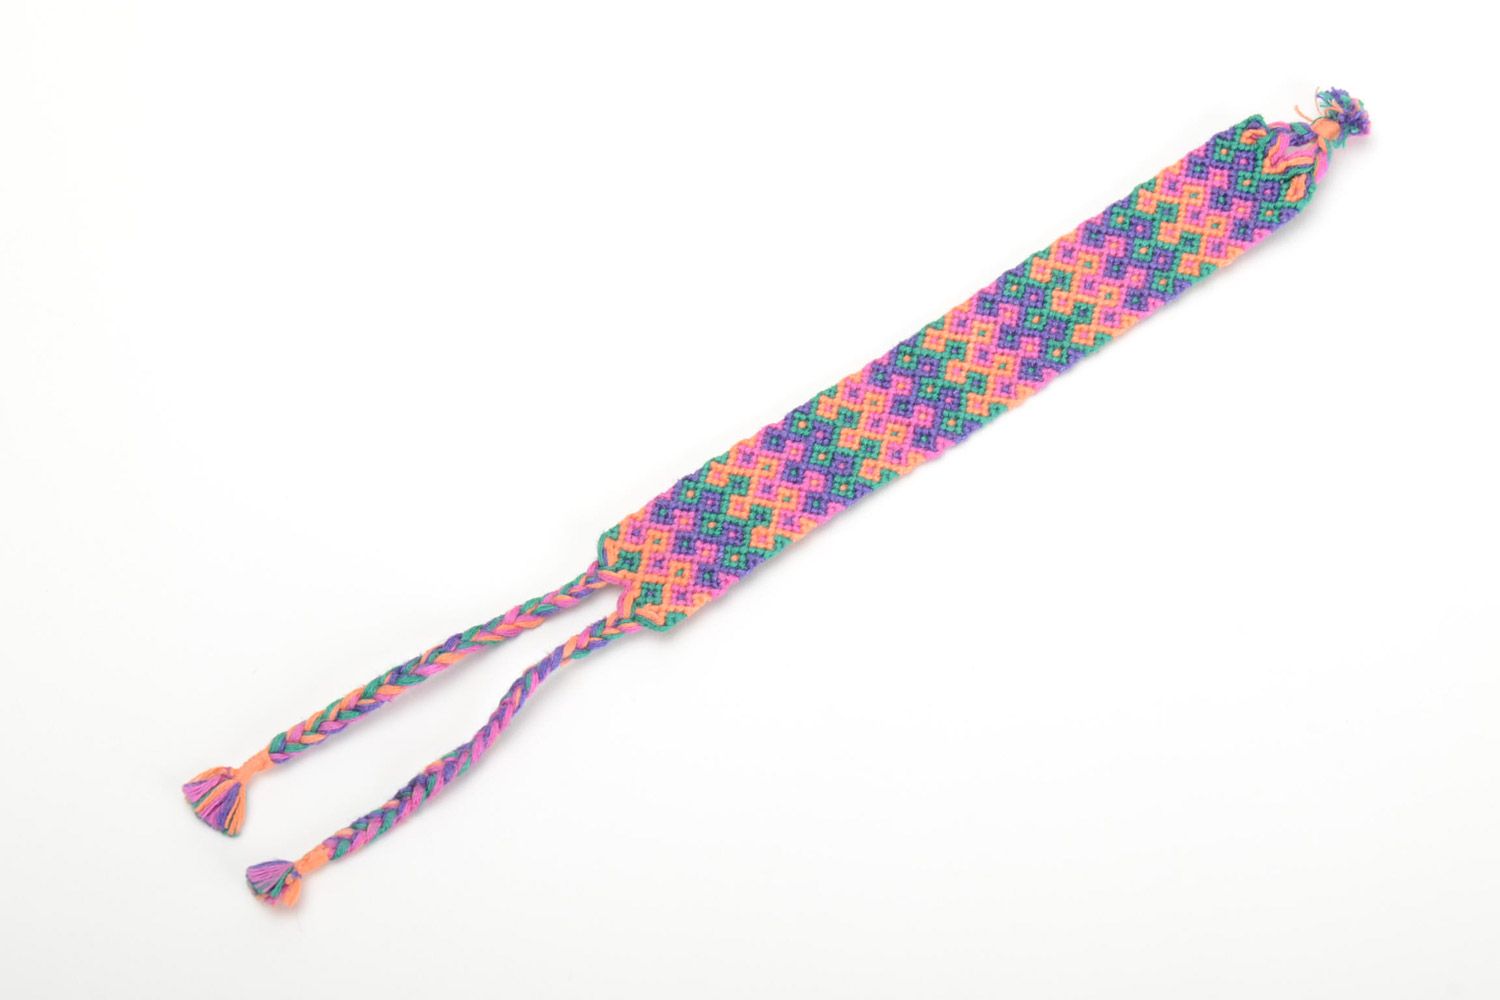 Handmade colorful friendship wrist bracelet woven of embroidery floss for women photo 2